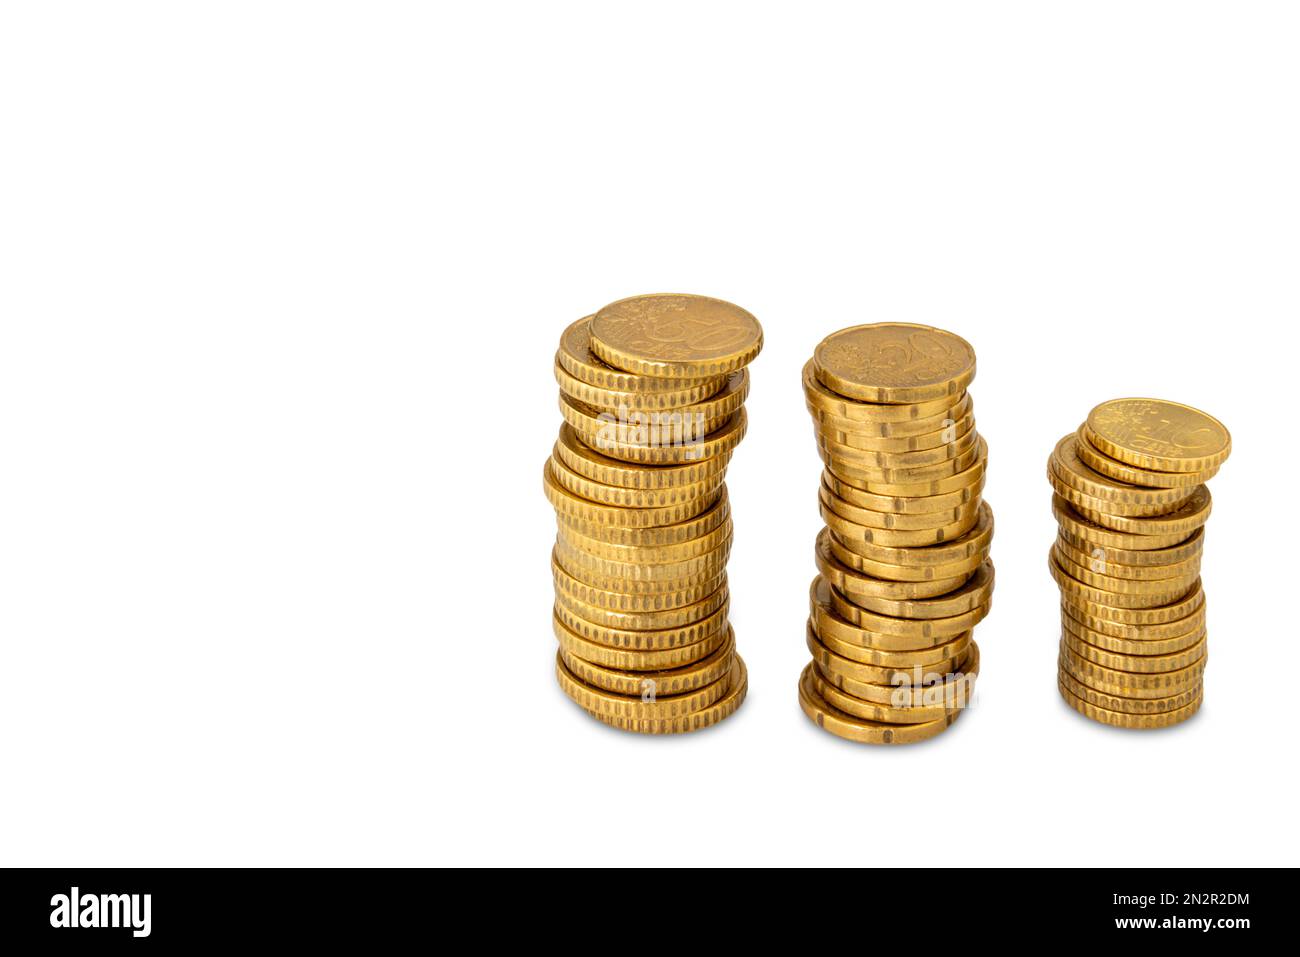 Stacks of gold colored coins, euro cents isolated on white with clipping path and copy space Stock Photo